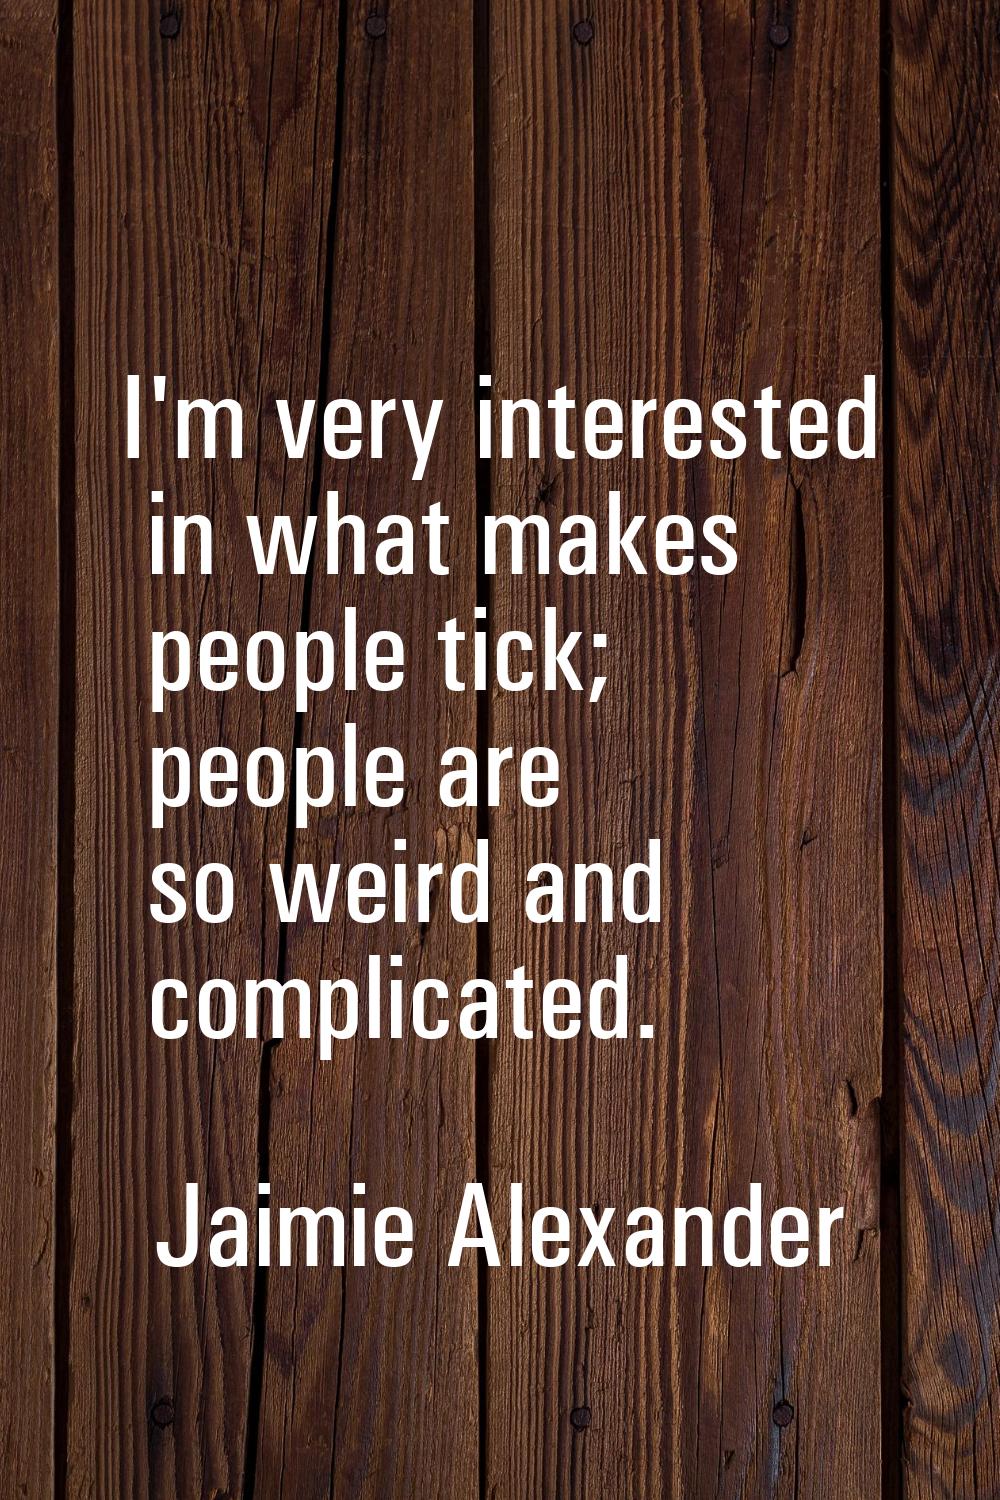 I'm very interested in what makes people tick; people are so weird and complicated.